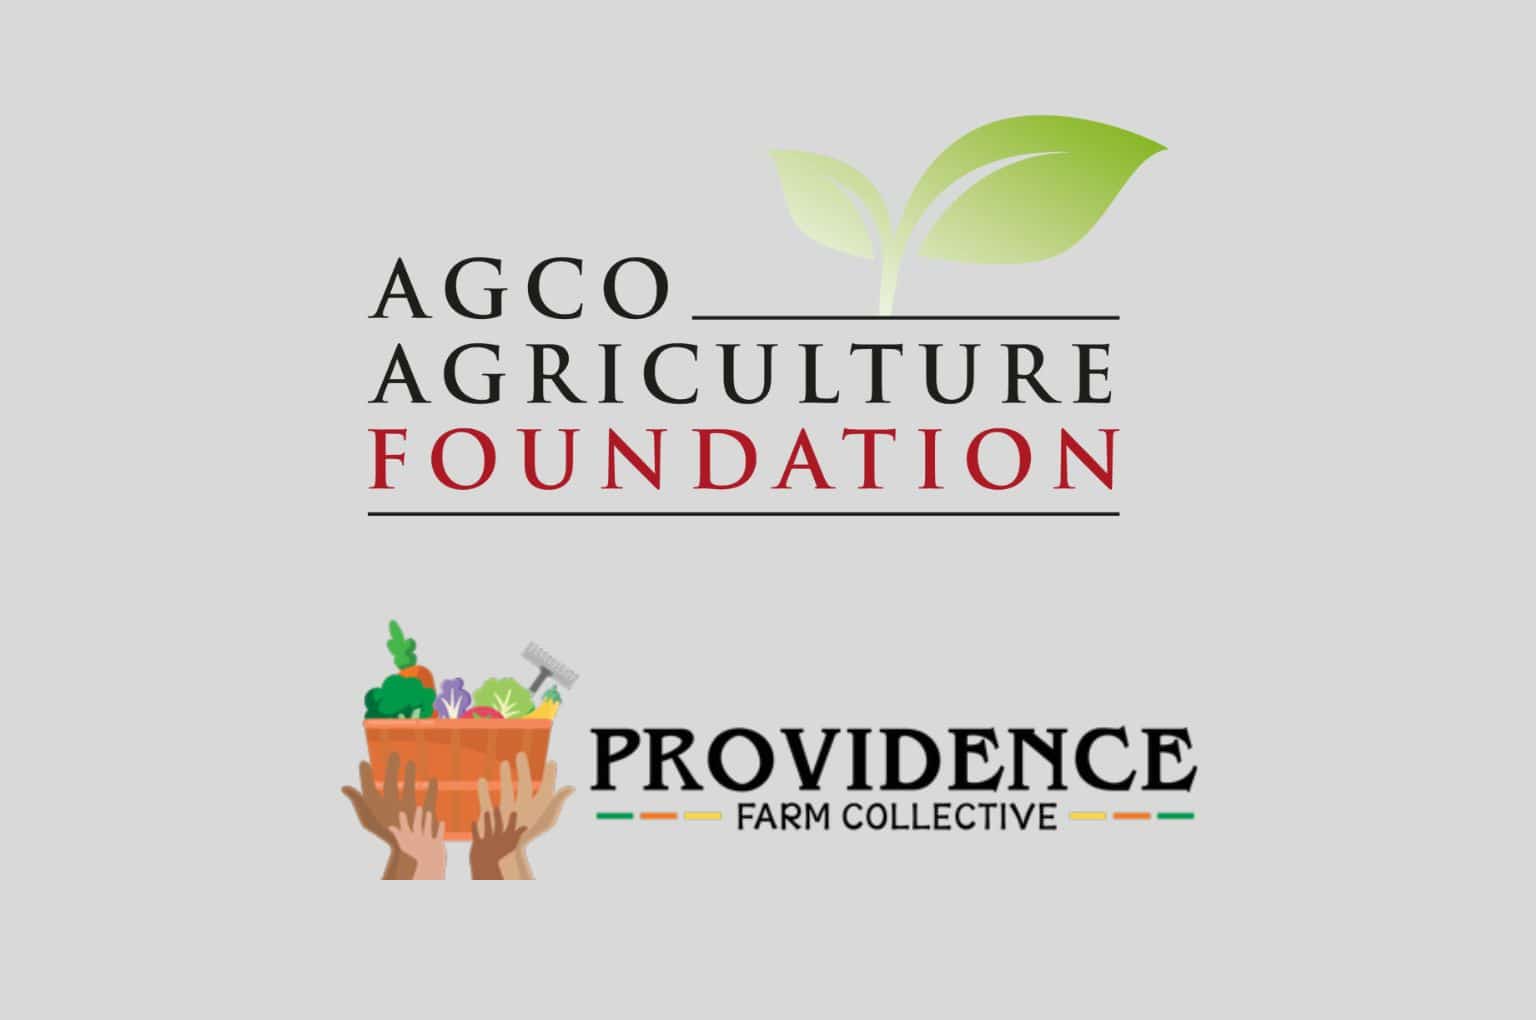 AGCO Agriculture Foundation grants USD 50,000 to Providence